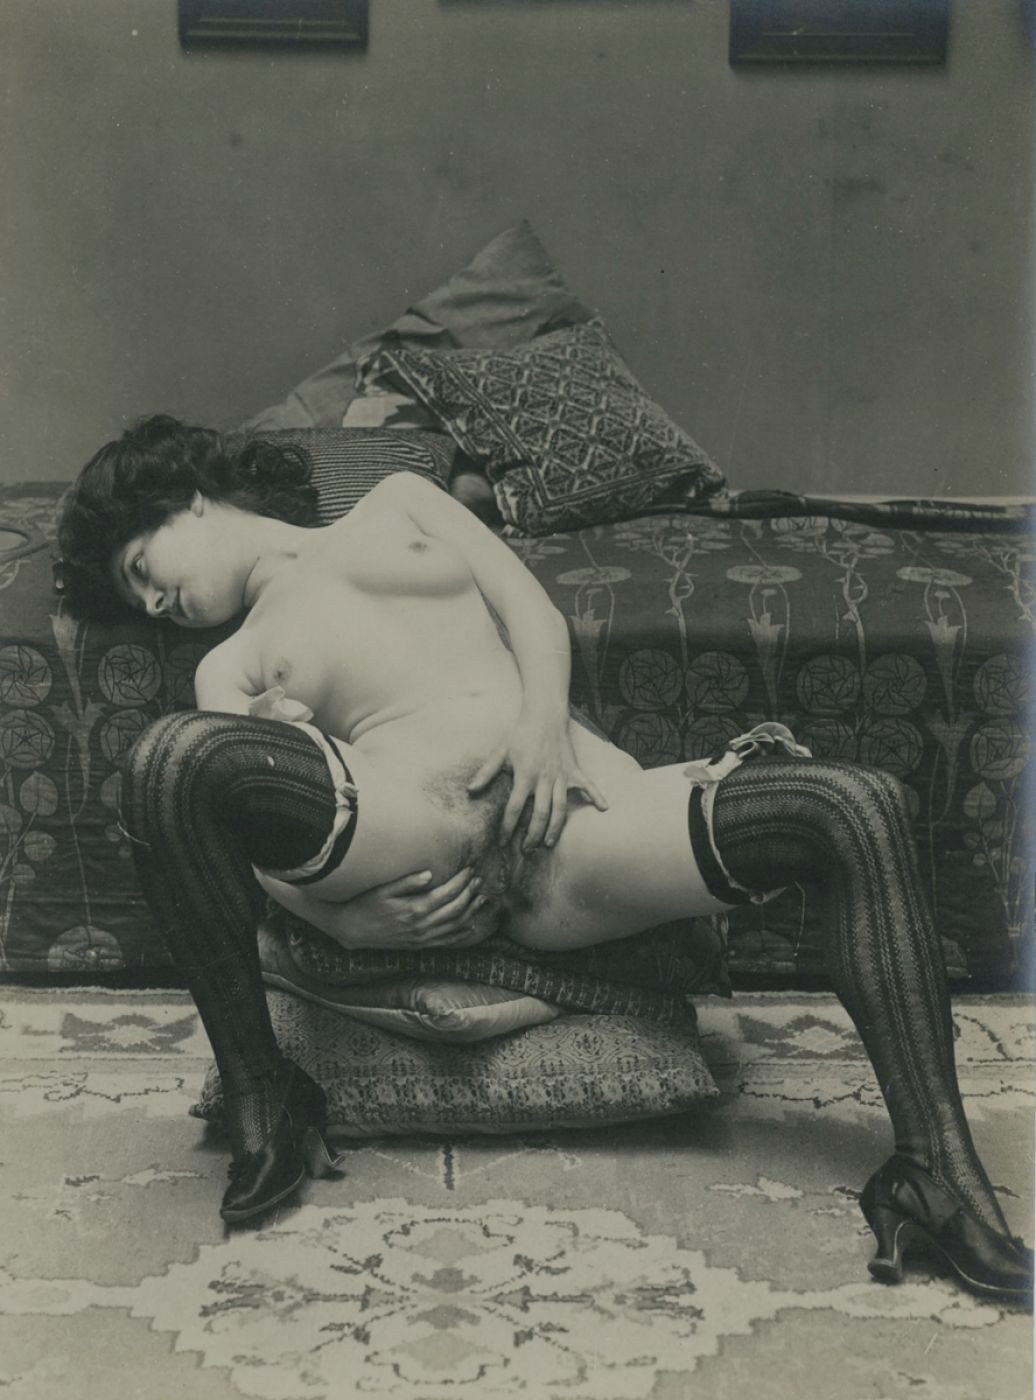 Anonymous, “Untitled”, 1910 ca.